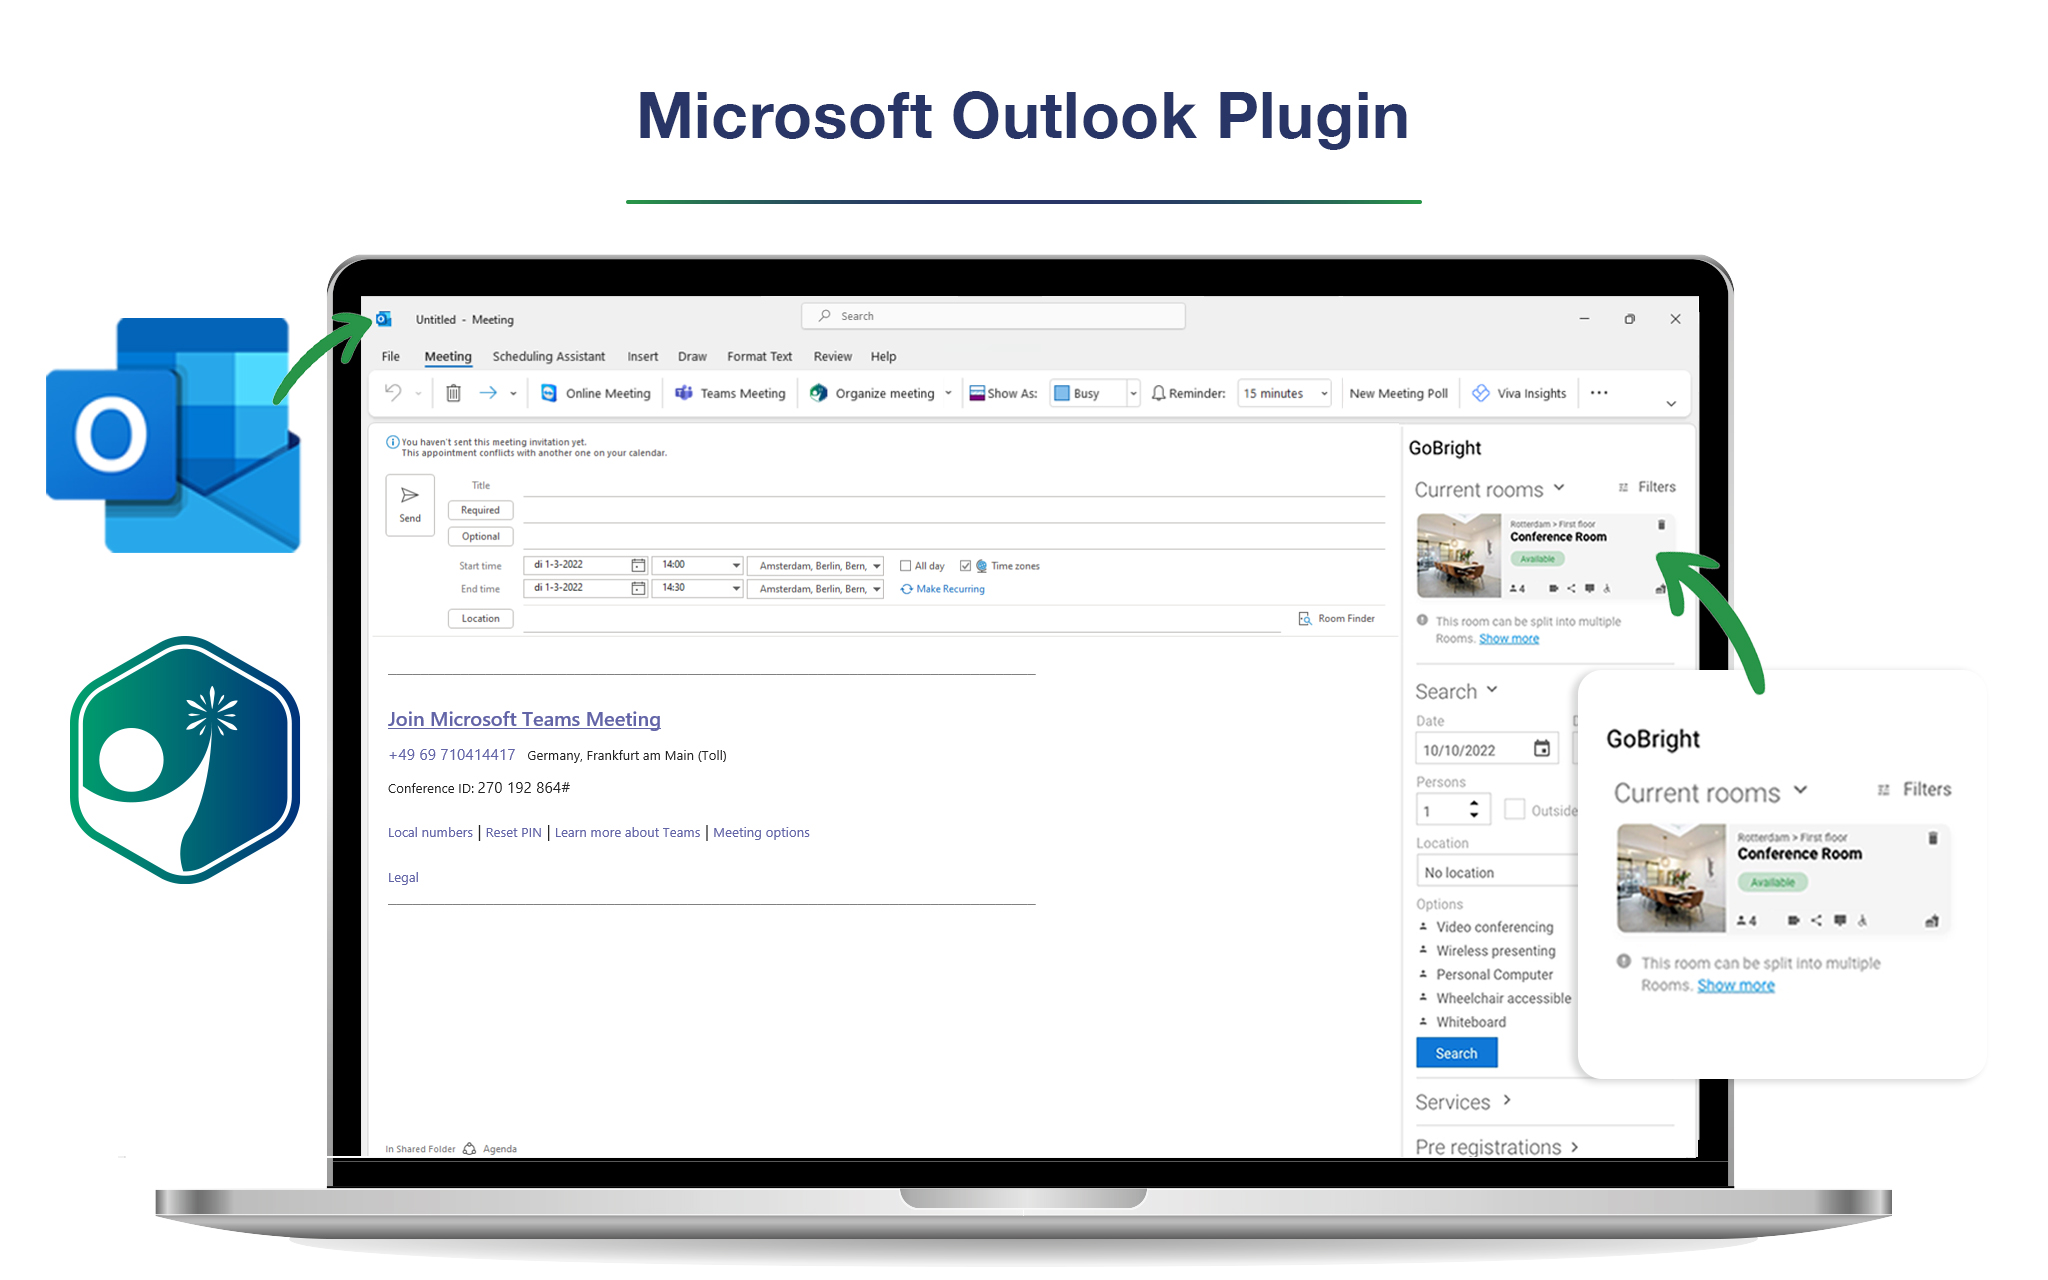 GoBright Outlook Plugin